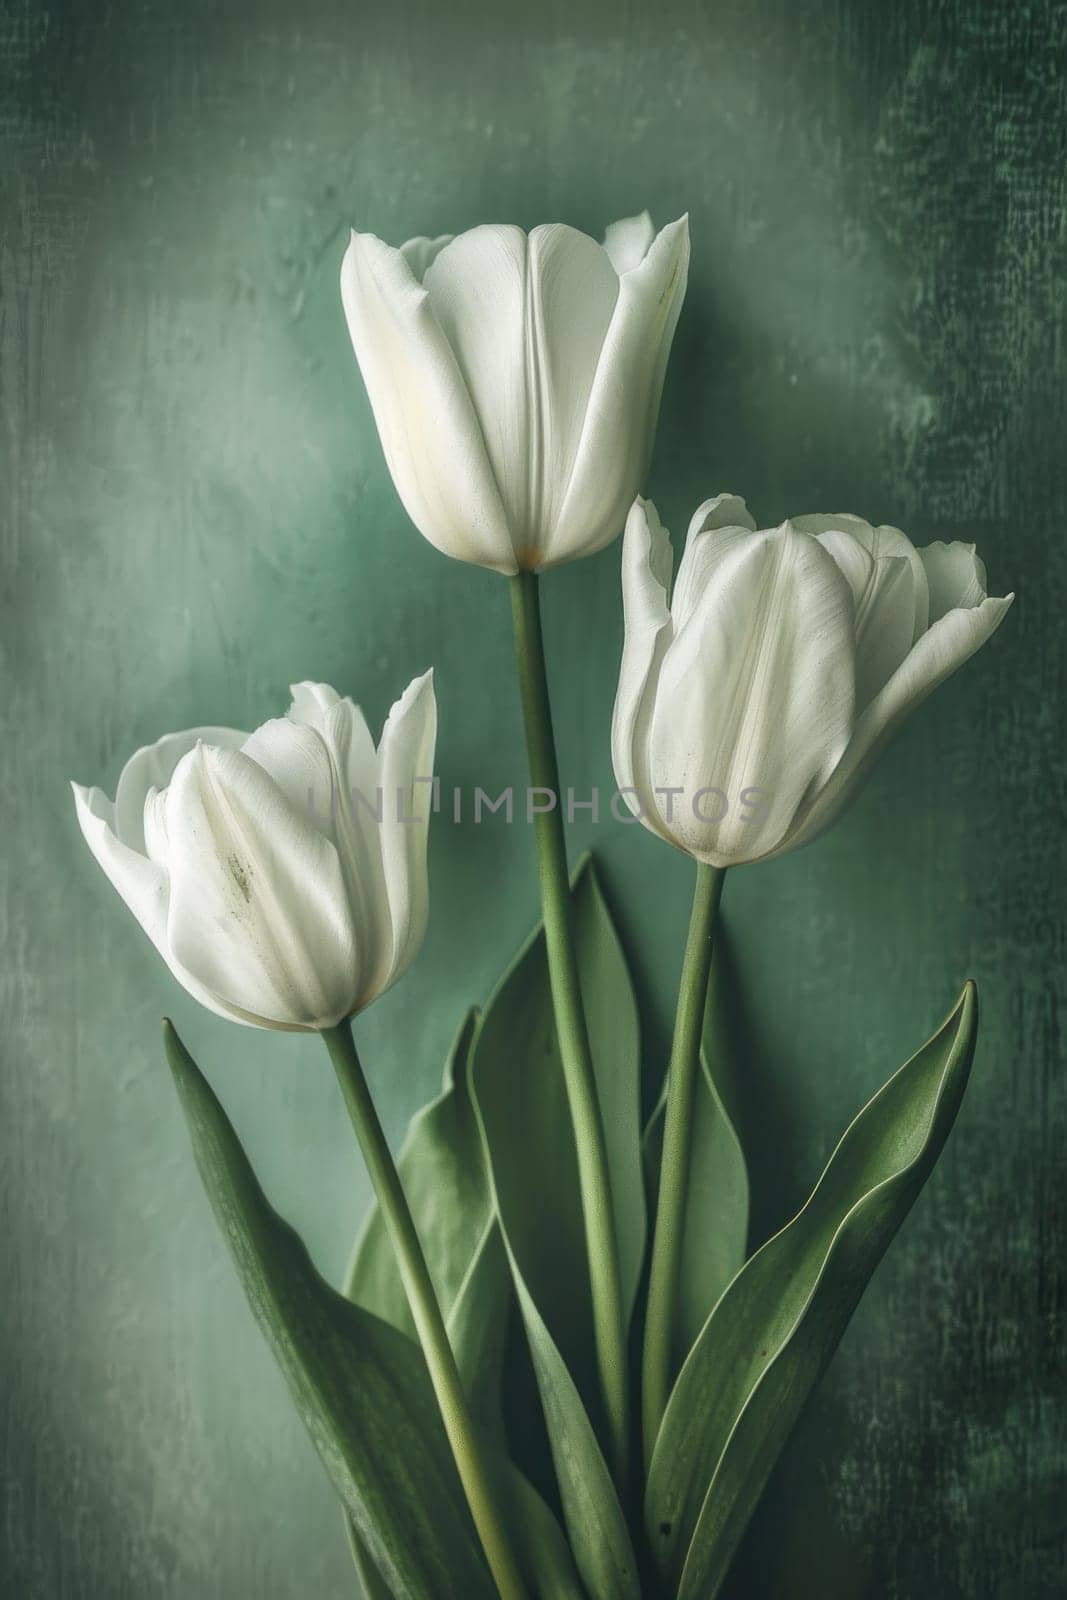 Spring blossoms three elegant white tulips in a vibrant green background symbolizing beauty and renewal by Vichizh